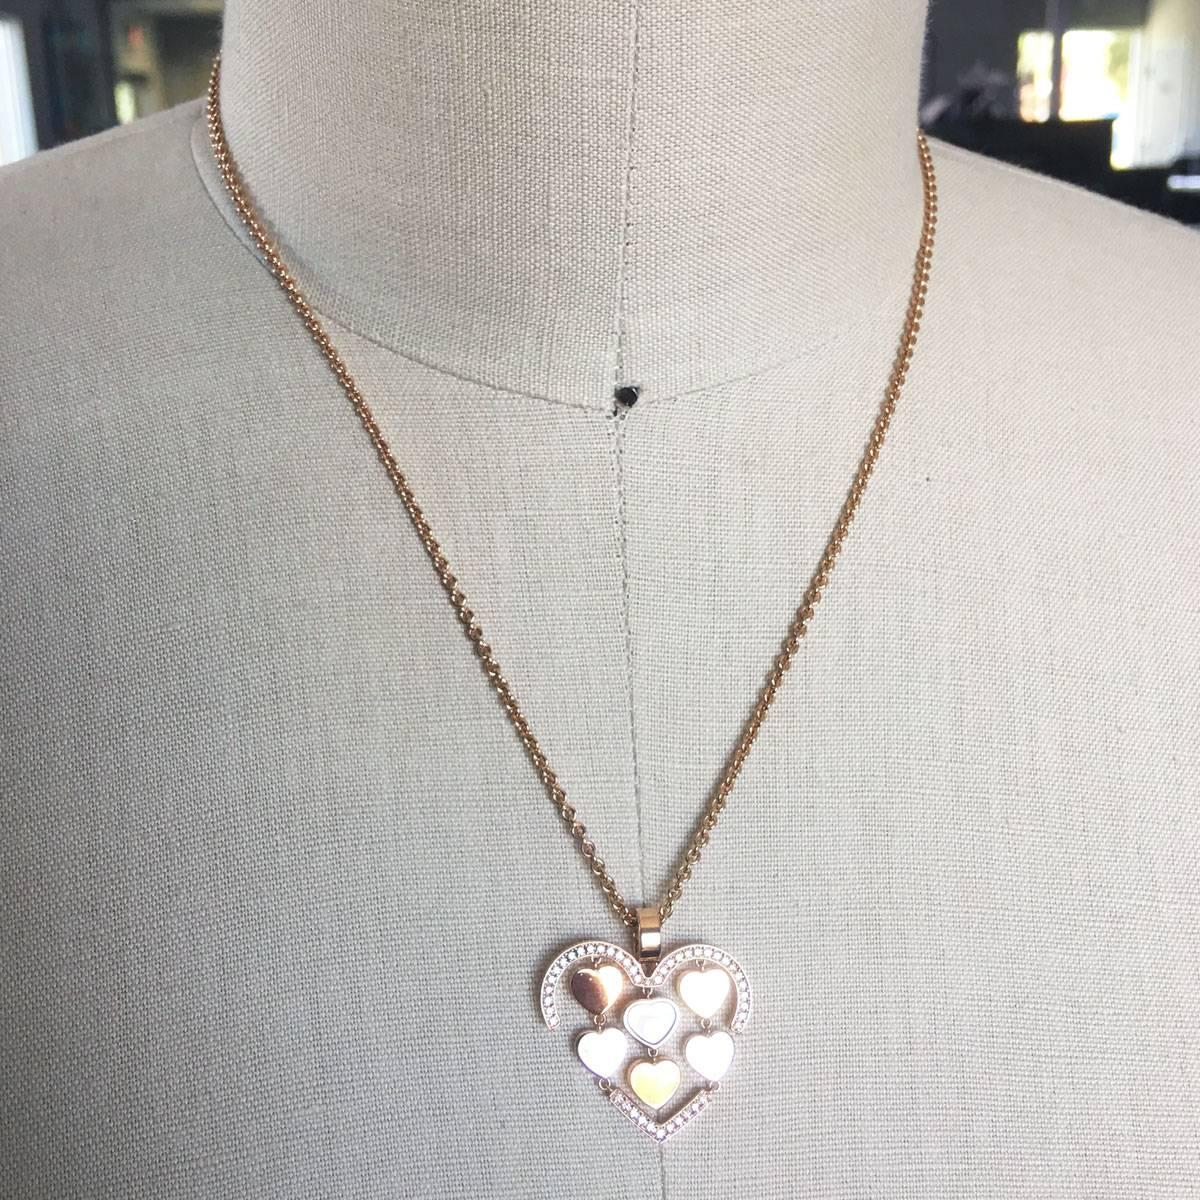 Women's Chopard Rose Gold Happy Amore Floating Diamond Necklace